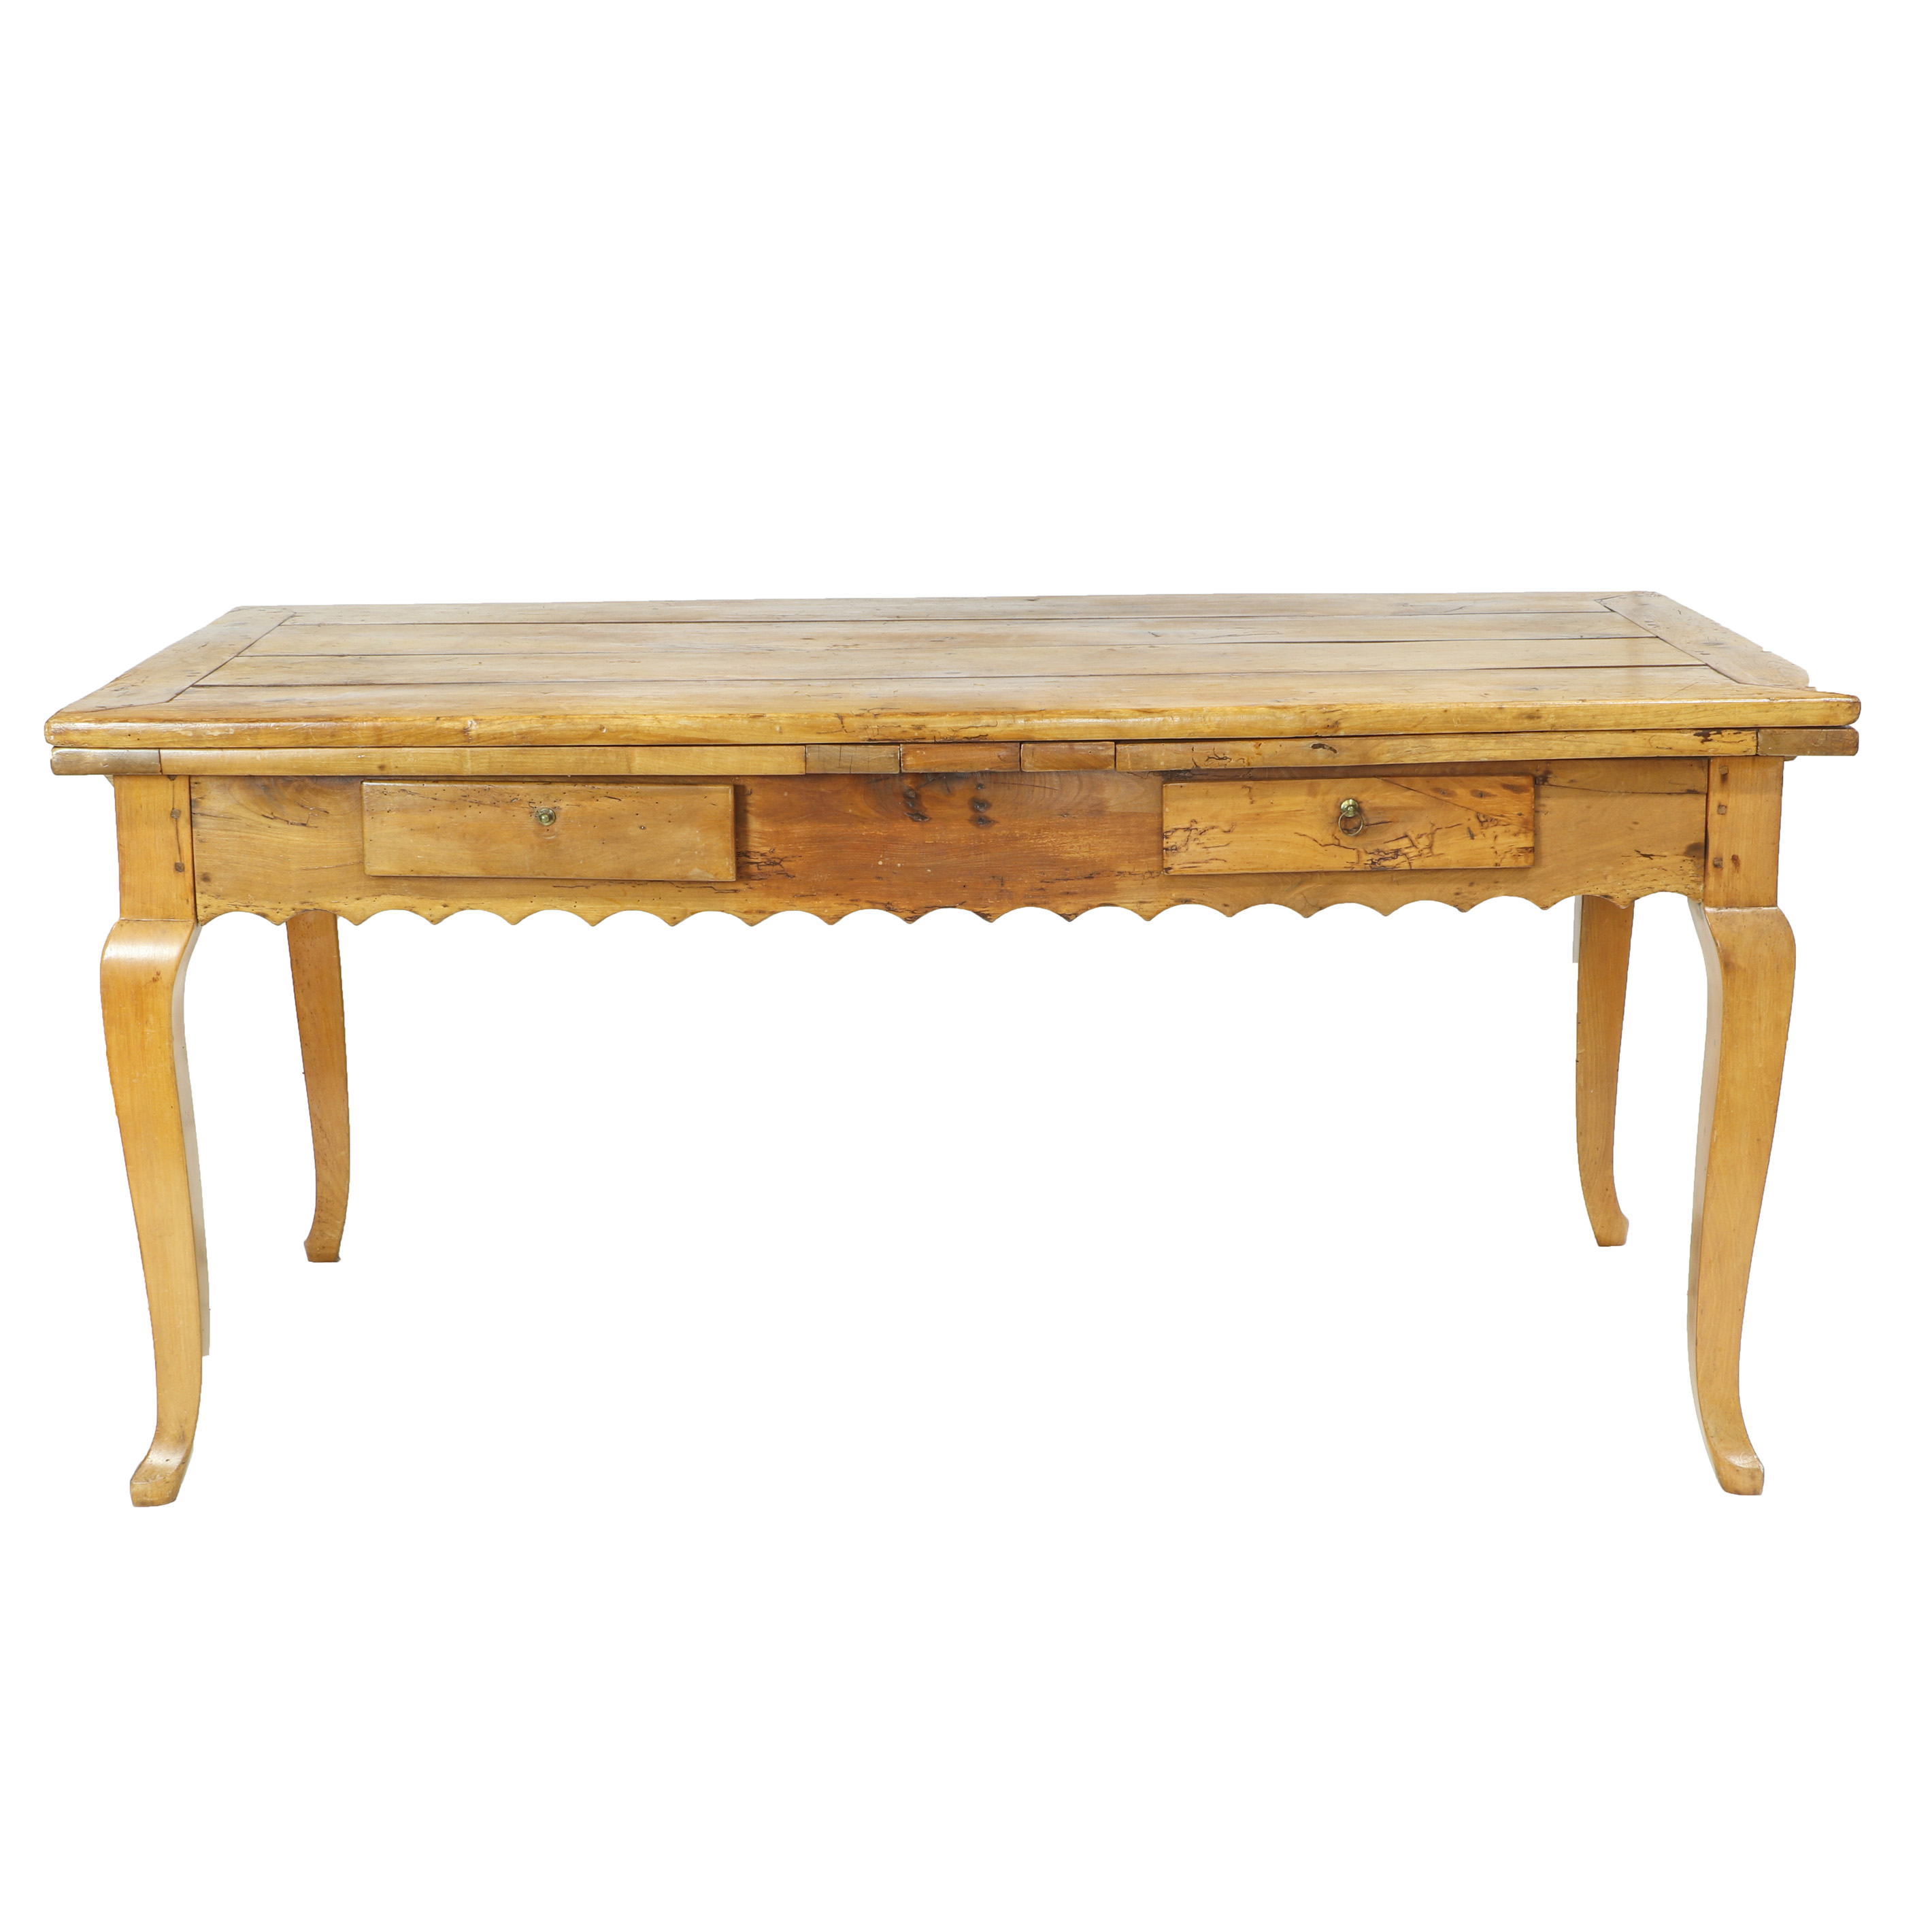 A FRENCH PROVINCIAL FRUITWOOD HARVEST